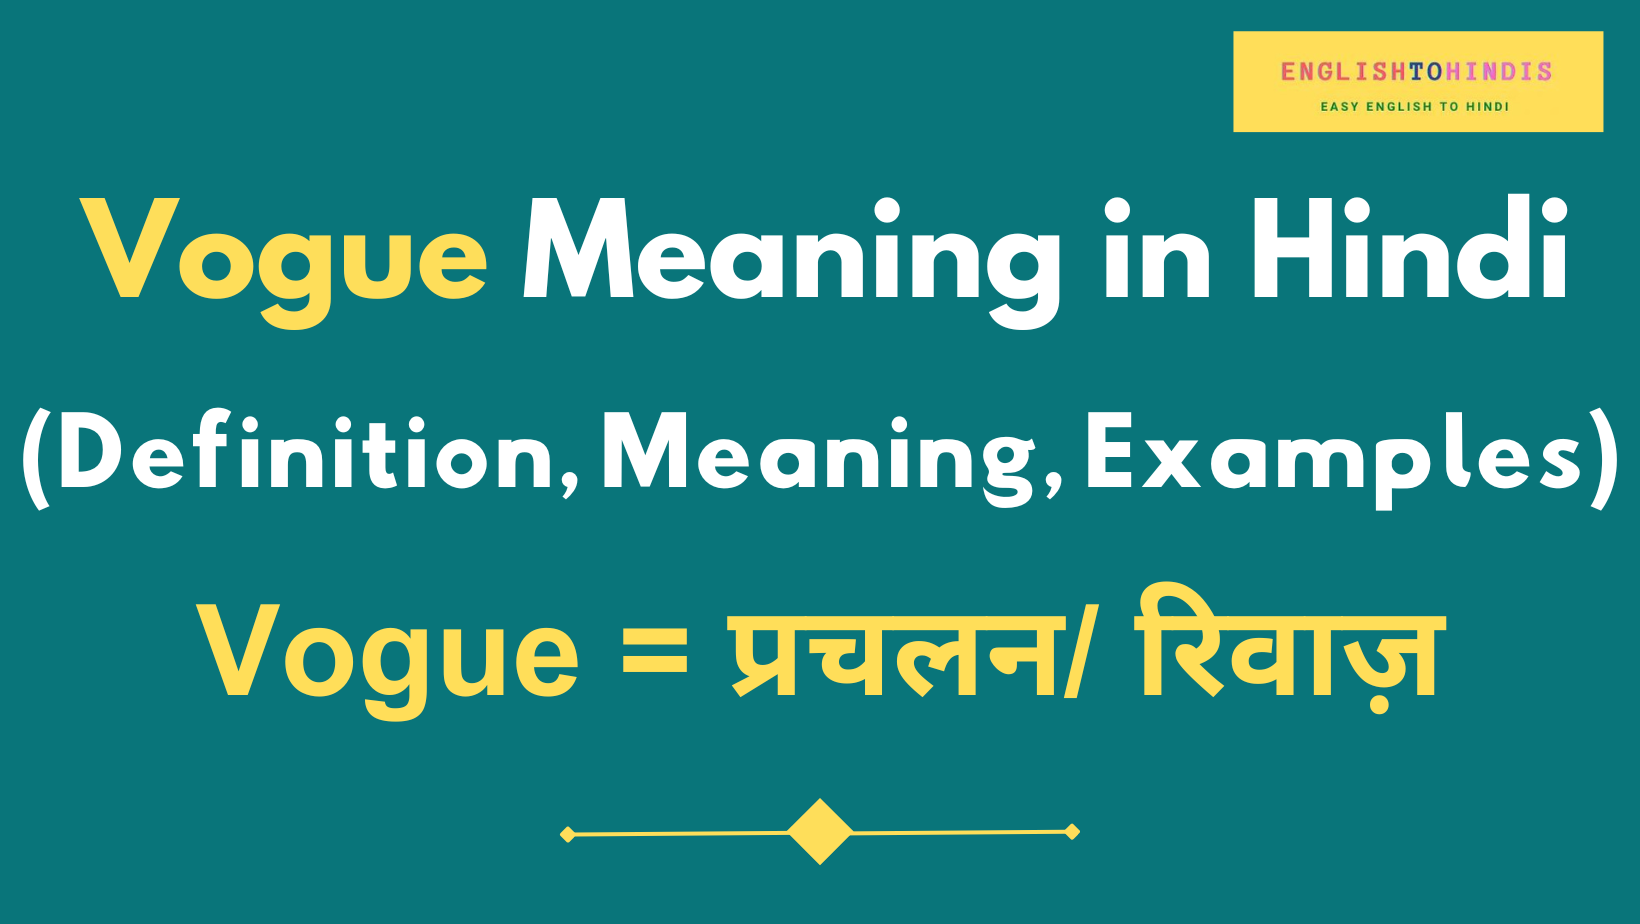 Vogue Meaning in Hindi